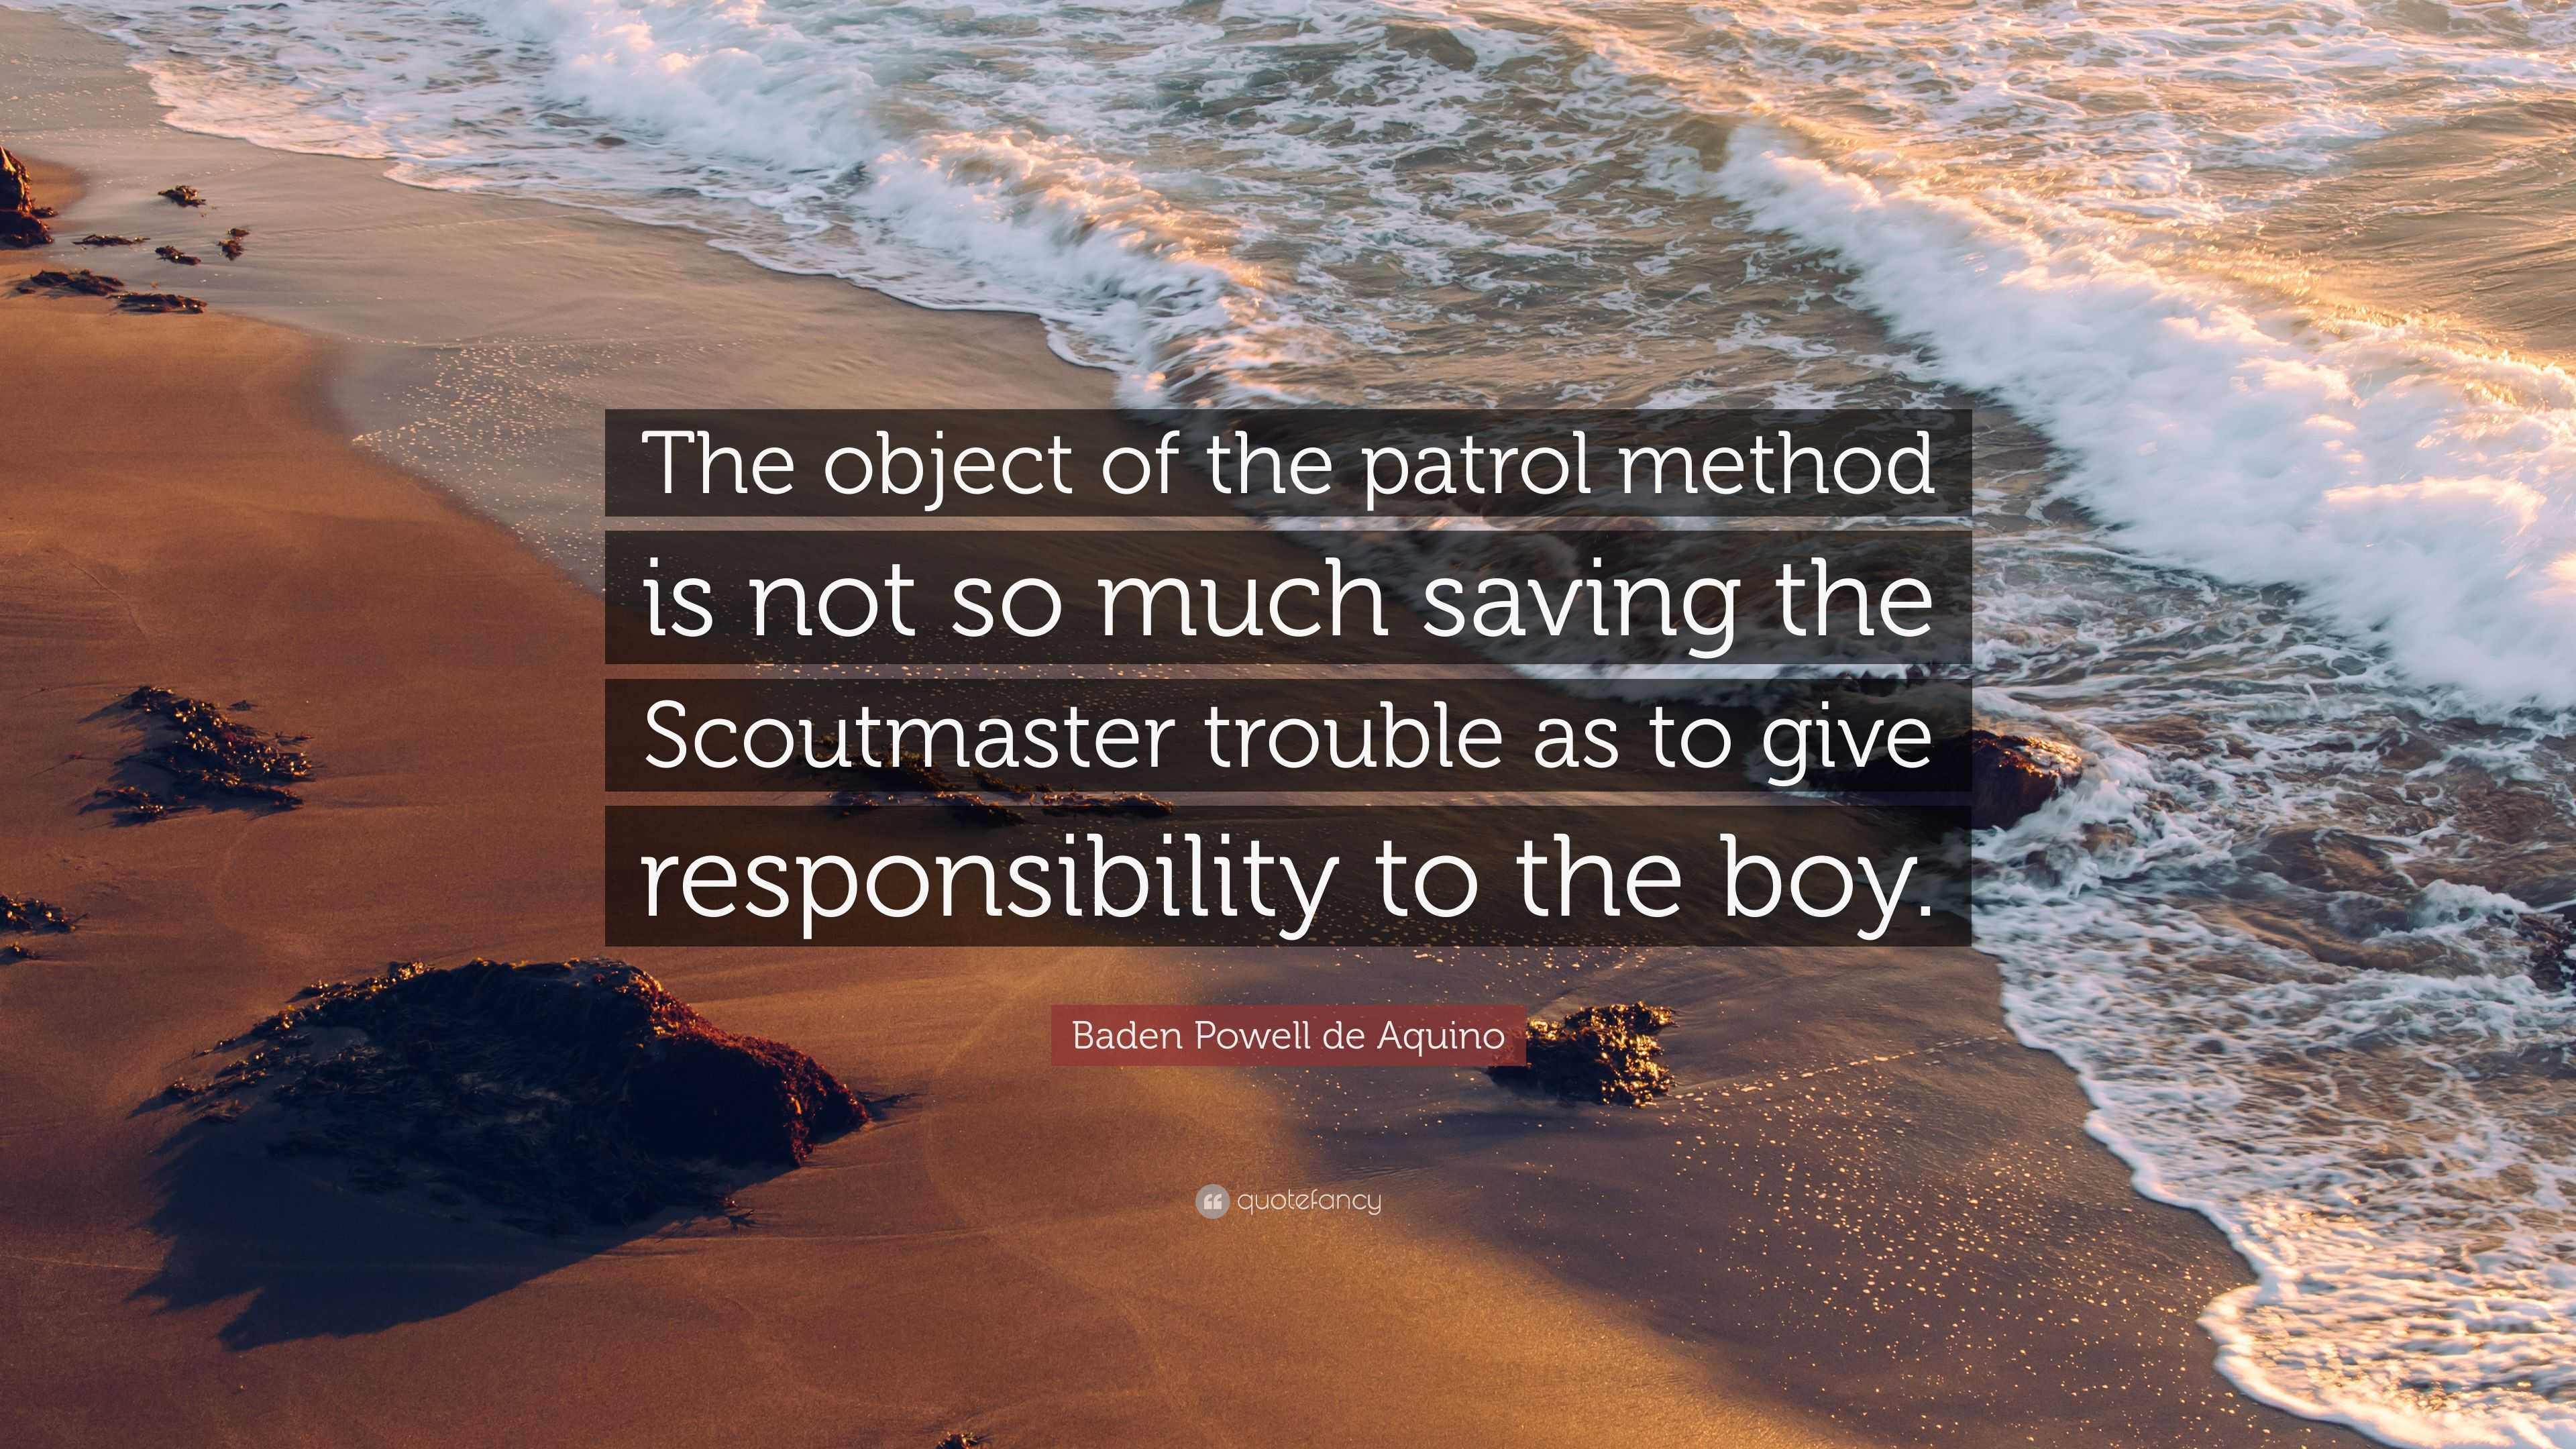 Baden Powell De Aquino Quote: “The Object Of The Patrol Method Is Not So Much Saving